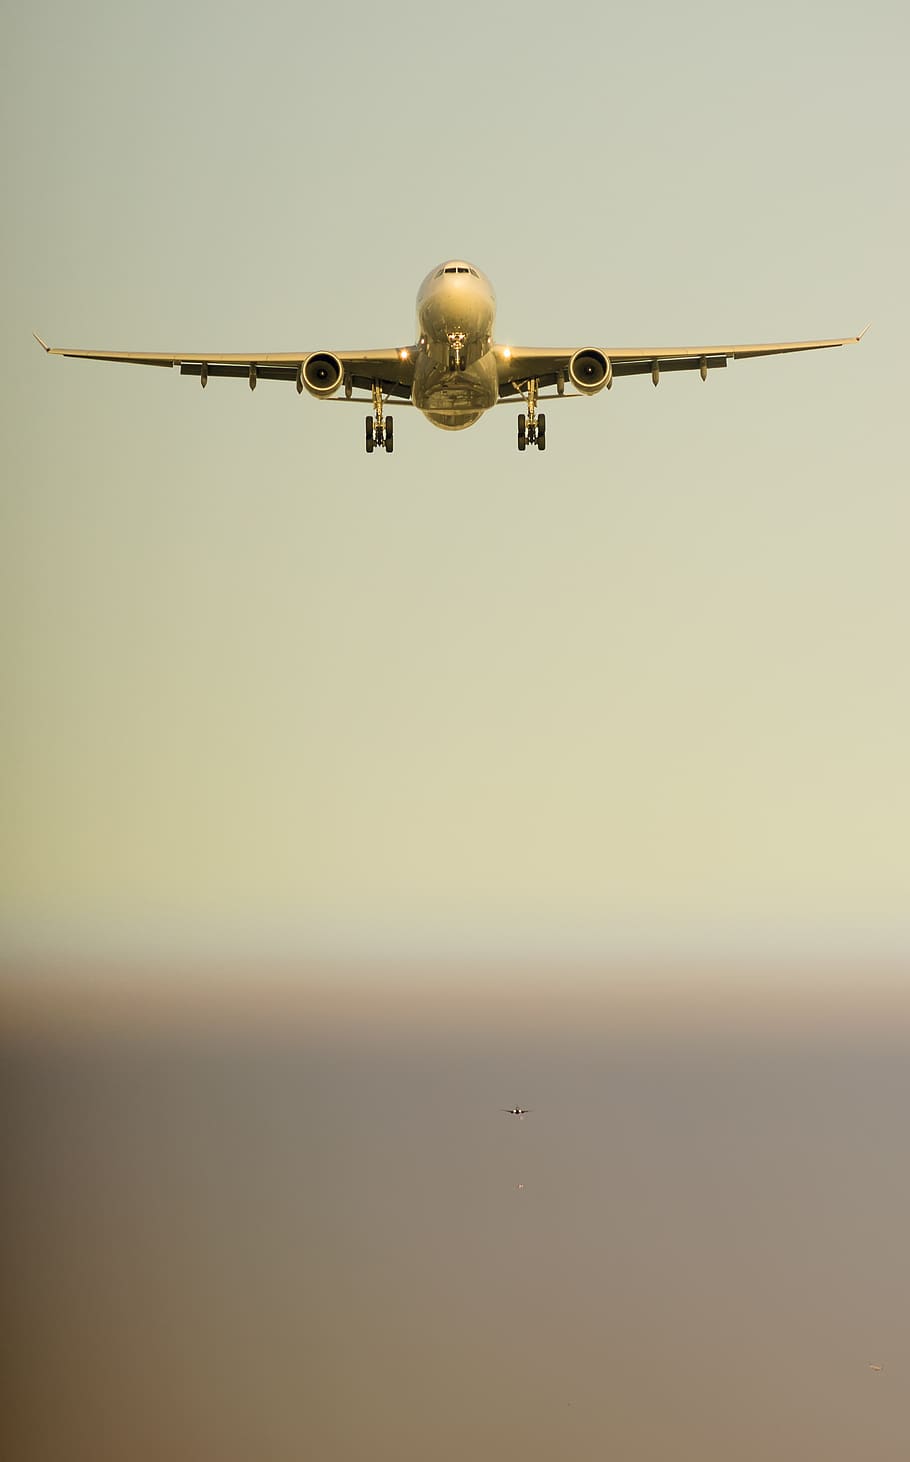 plane, land, airport, aircraft, sky, fly, wing, clouds, landing, setting sun